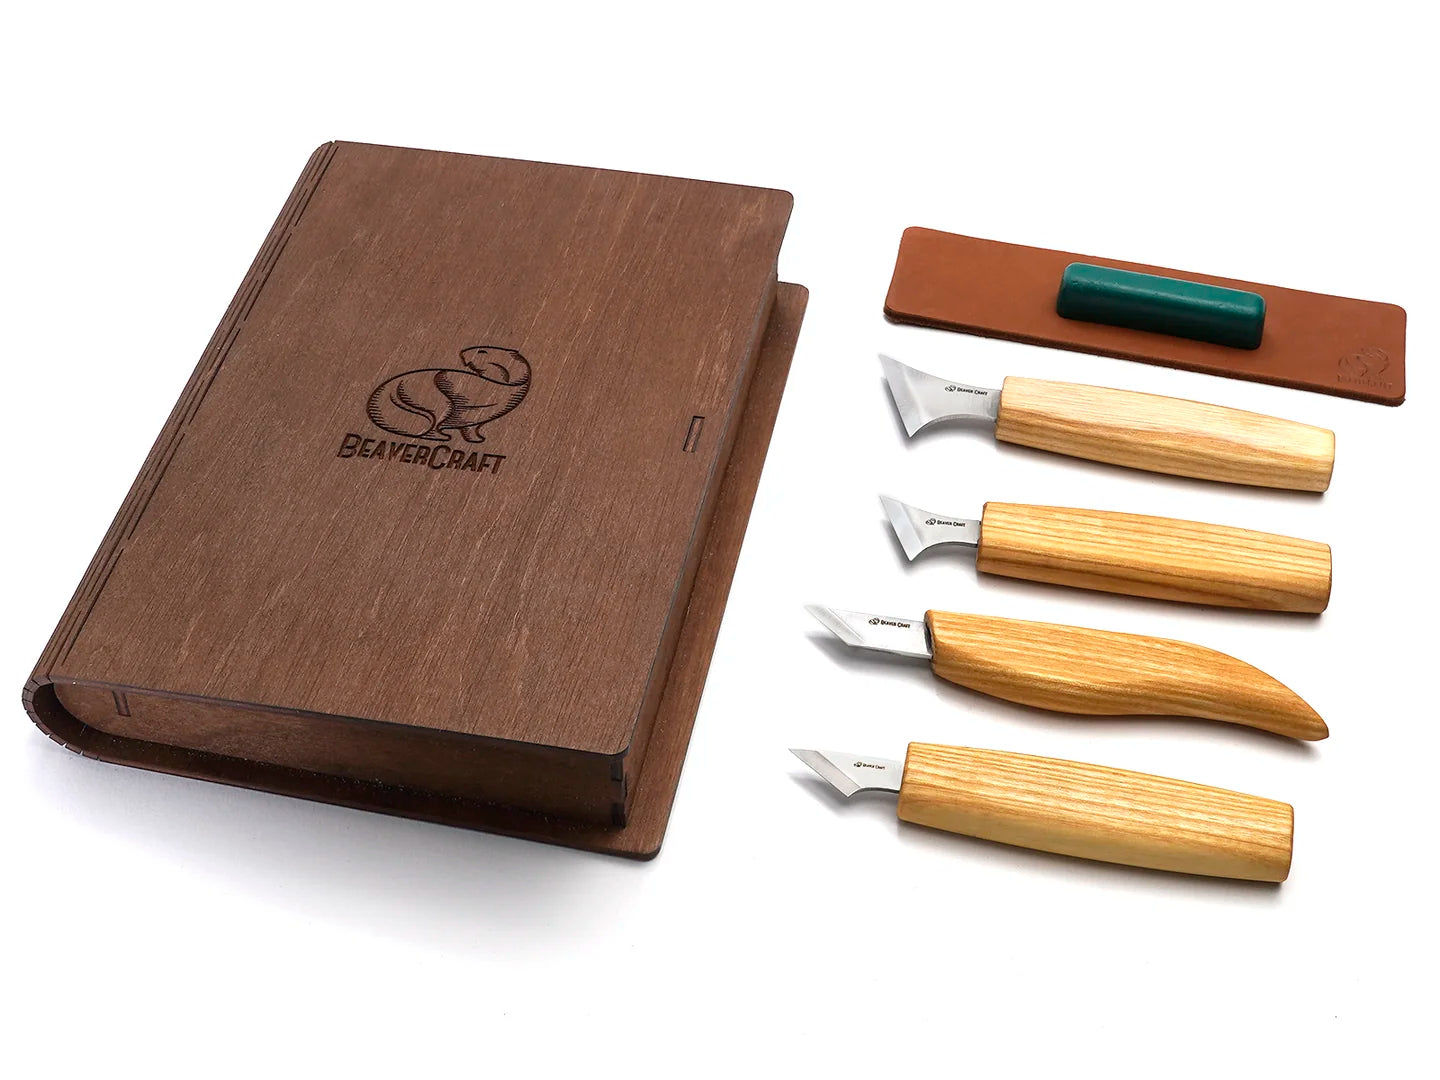 Buy SC05 book - Geometric Wood Carving Knives Set in a Book Case